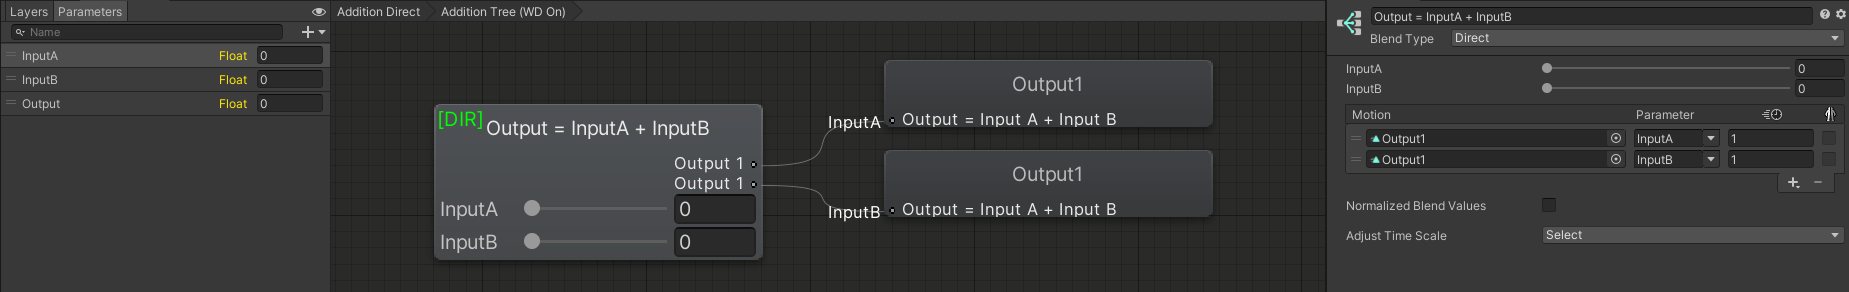 An example of adding two values by animating the Output AAP in two animation children in a Direct Blend Tree.